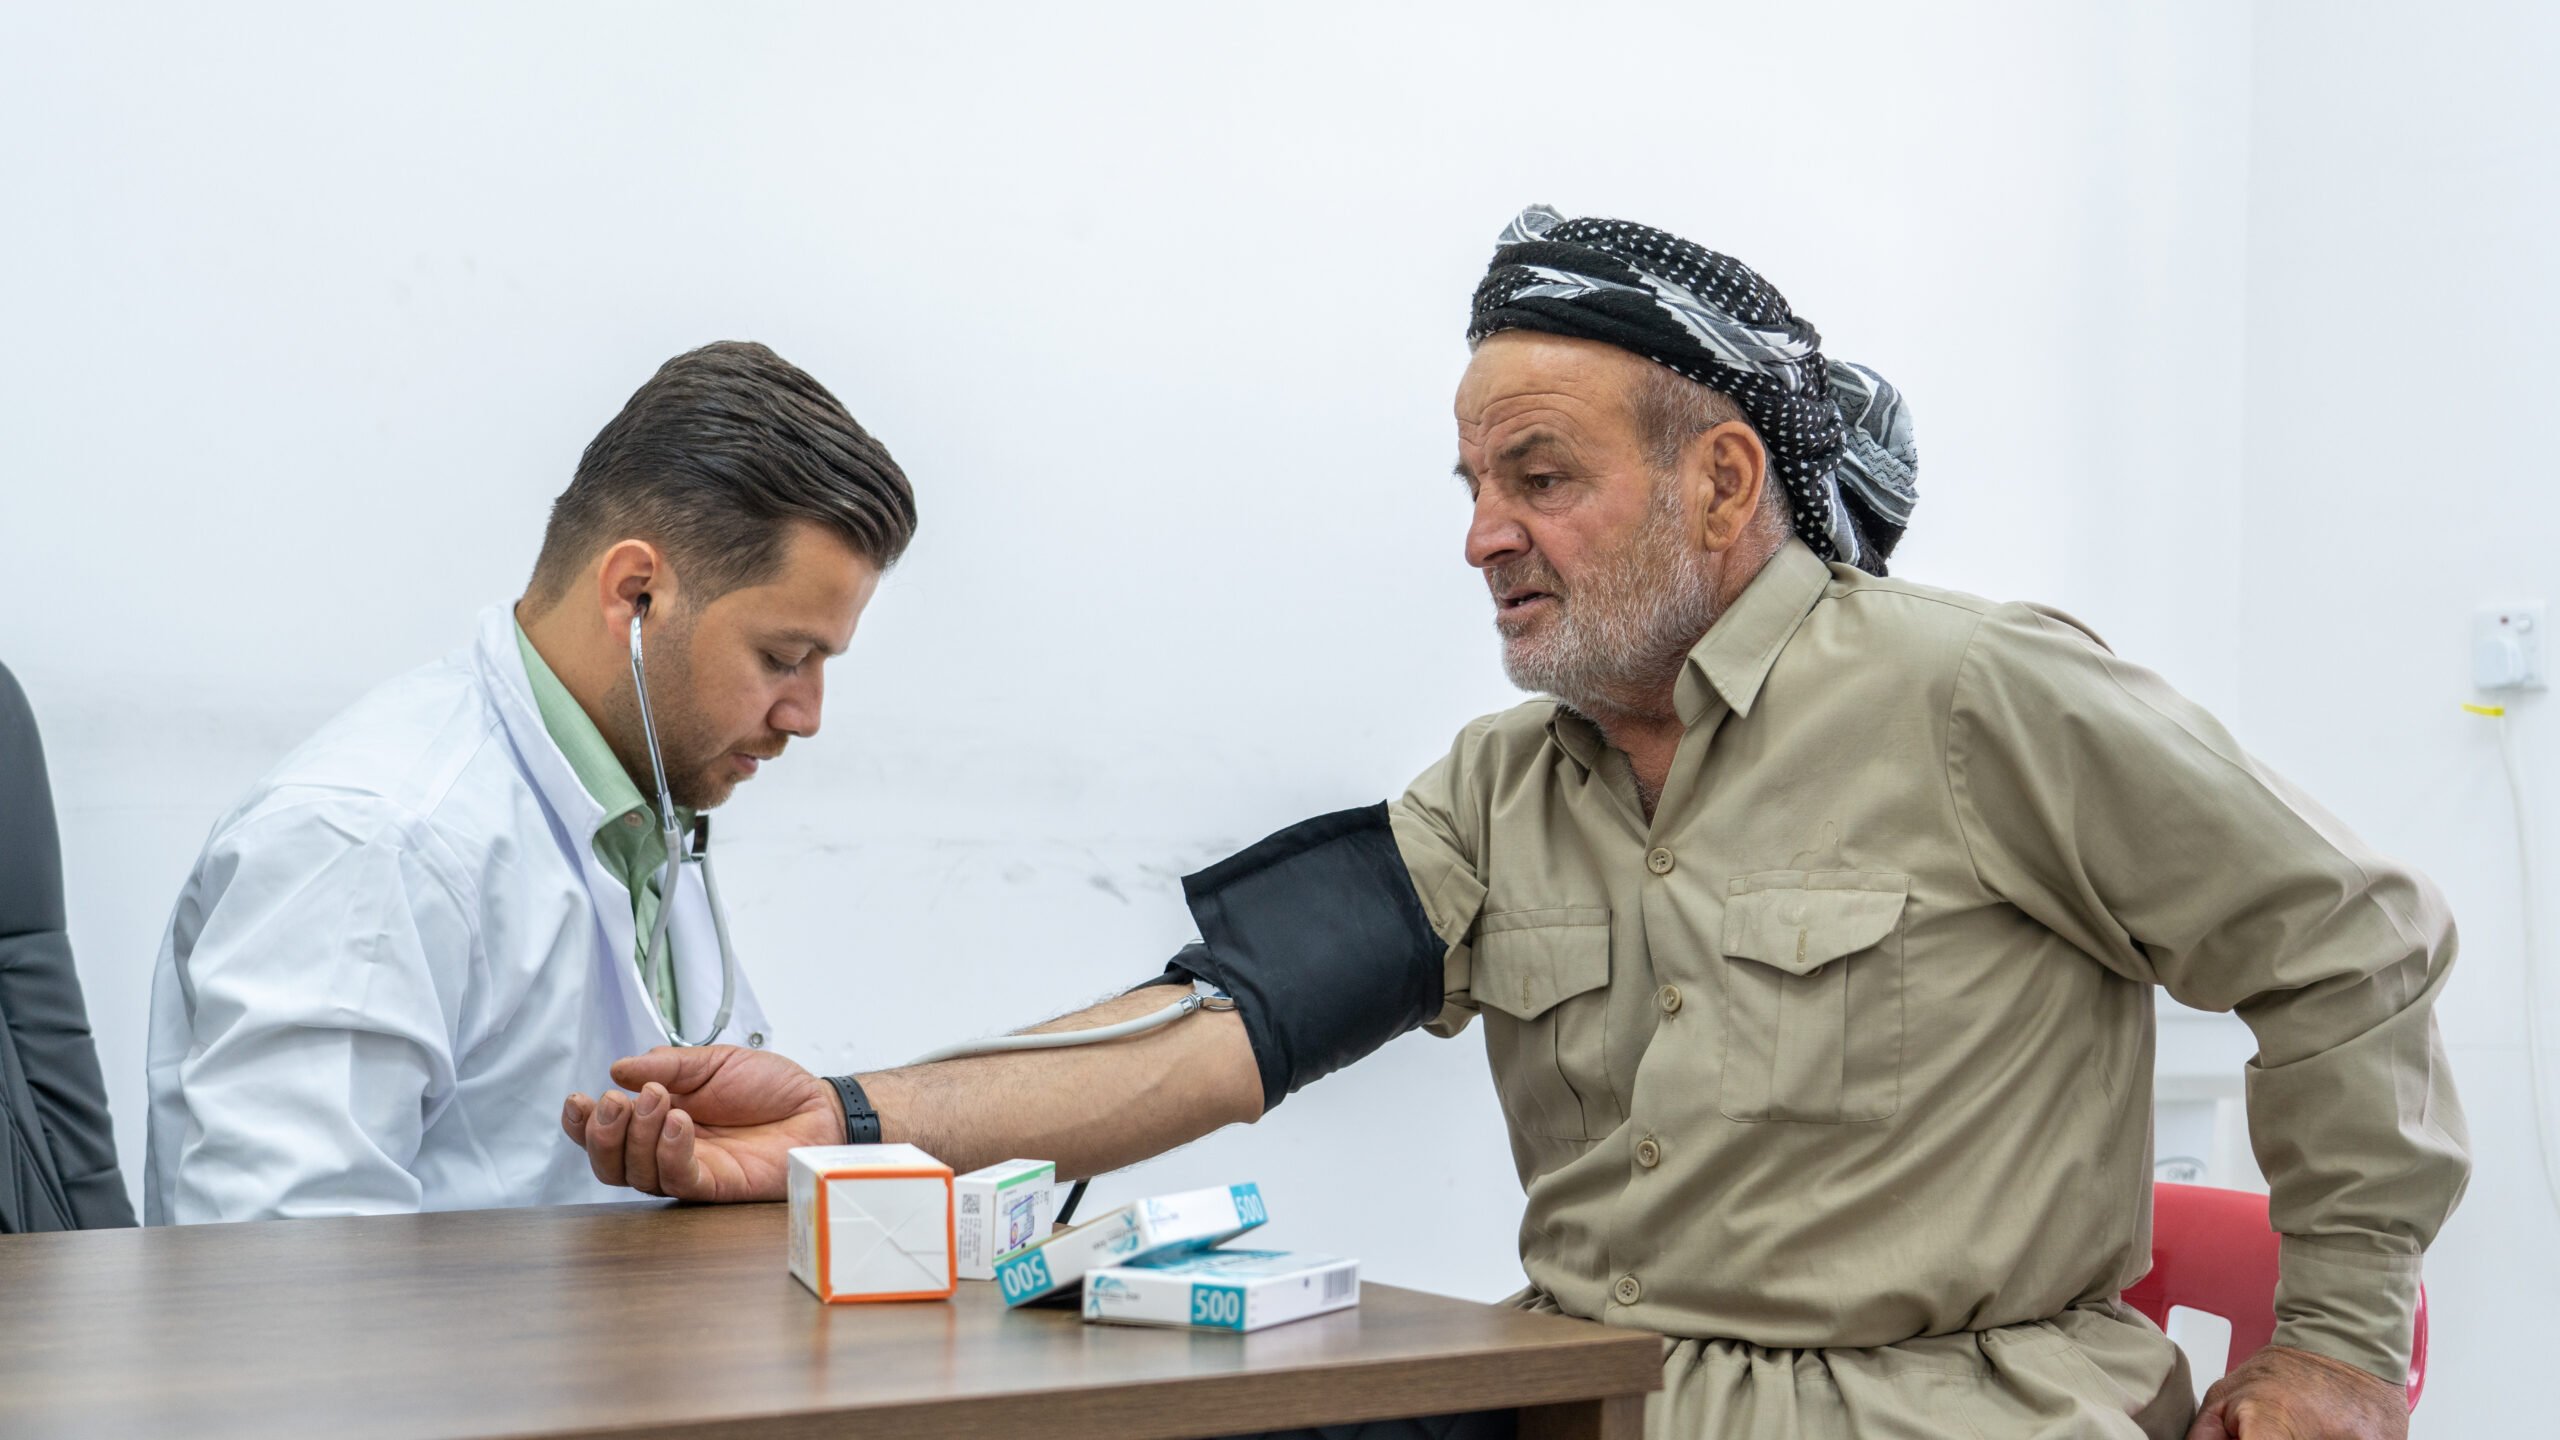 "I recently underwent examinations at Kawergosk clinic where services + medicines are accessible. It brings me joy that the wellbeing of Iraqis & refugees is taken into consideration"; - Mam Haji, from Erbil